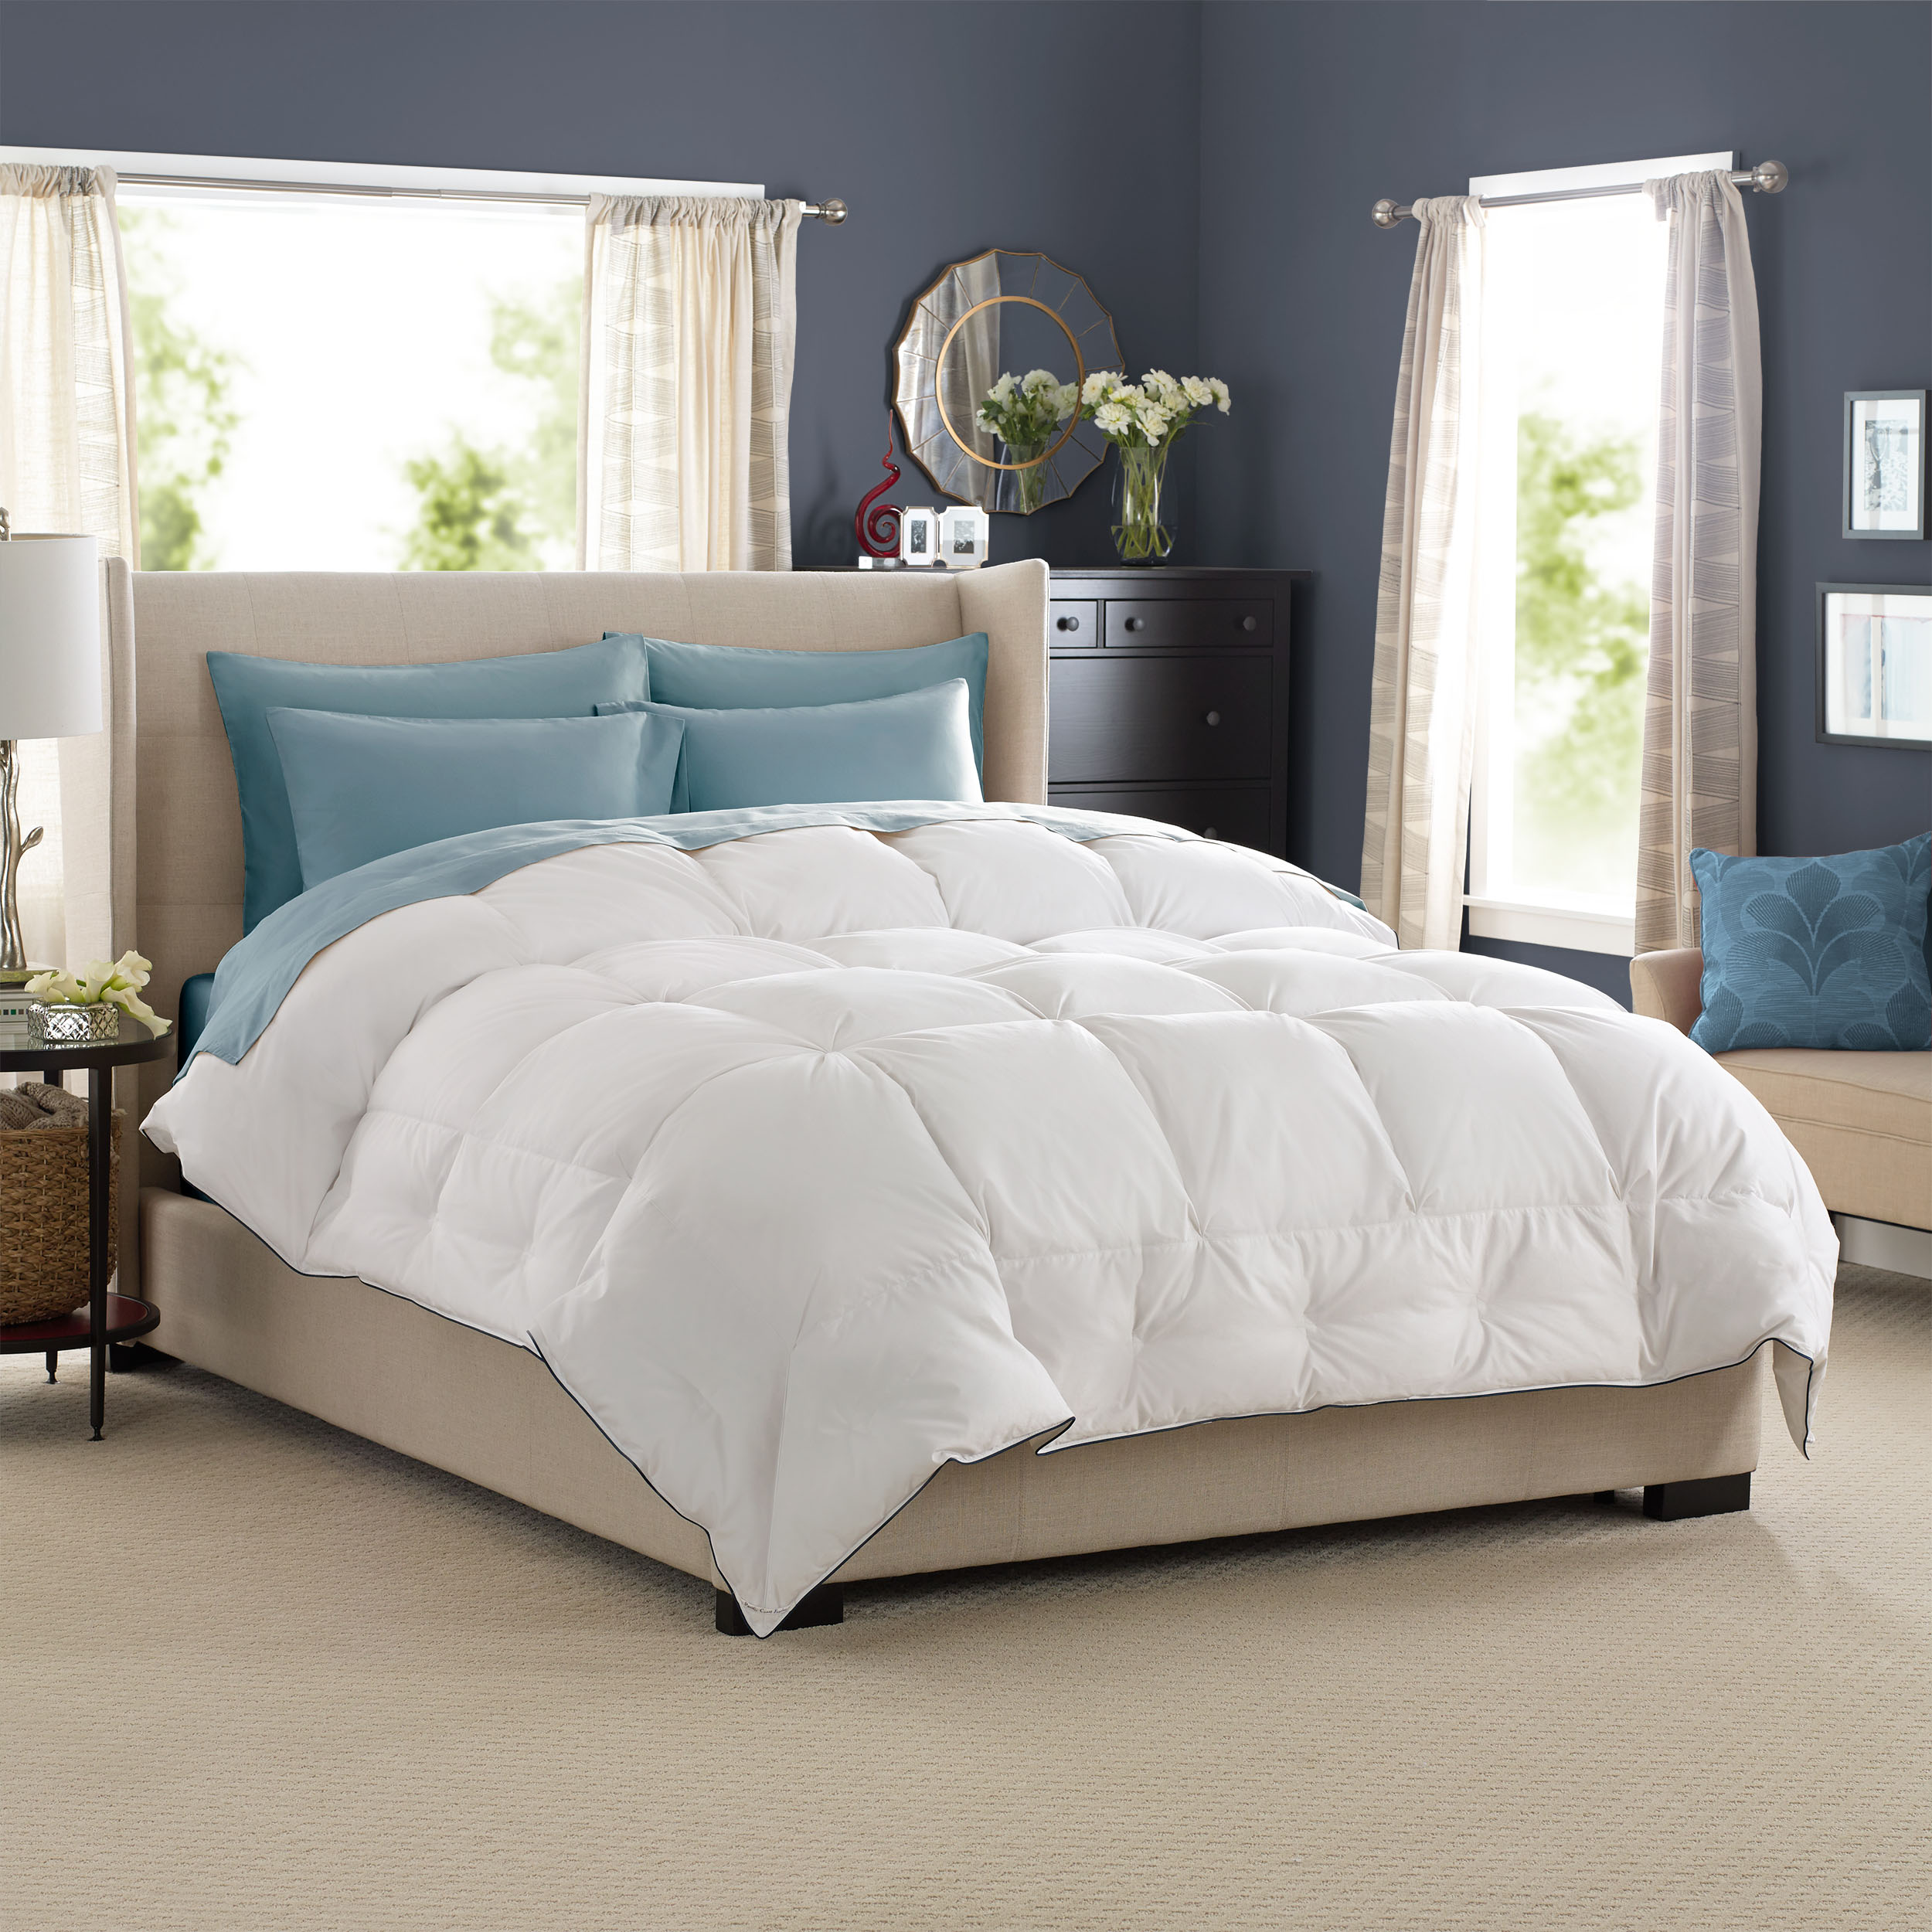 Pacific Coast Superloft Deluxe Comforter 500 Thread Count 600 Fill Power White Goose Down - King/calking